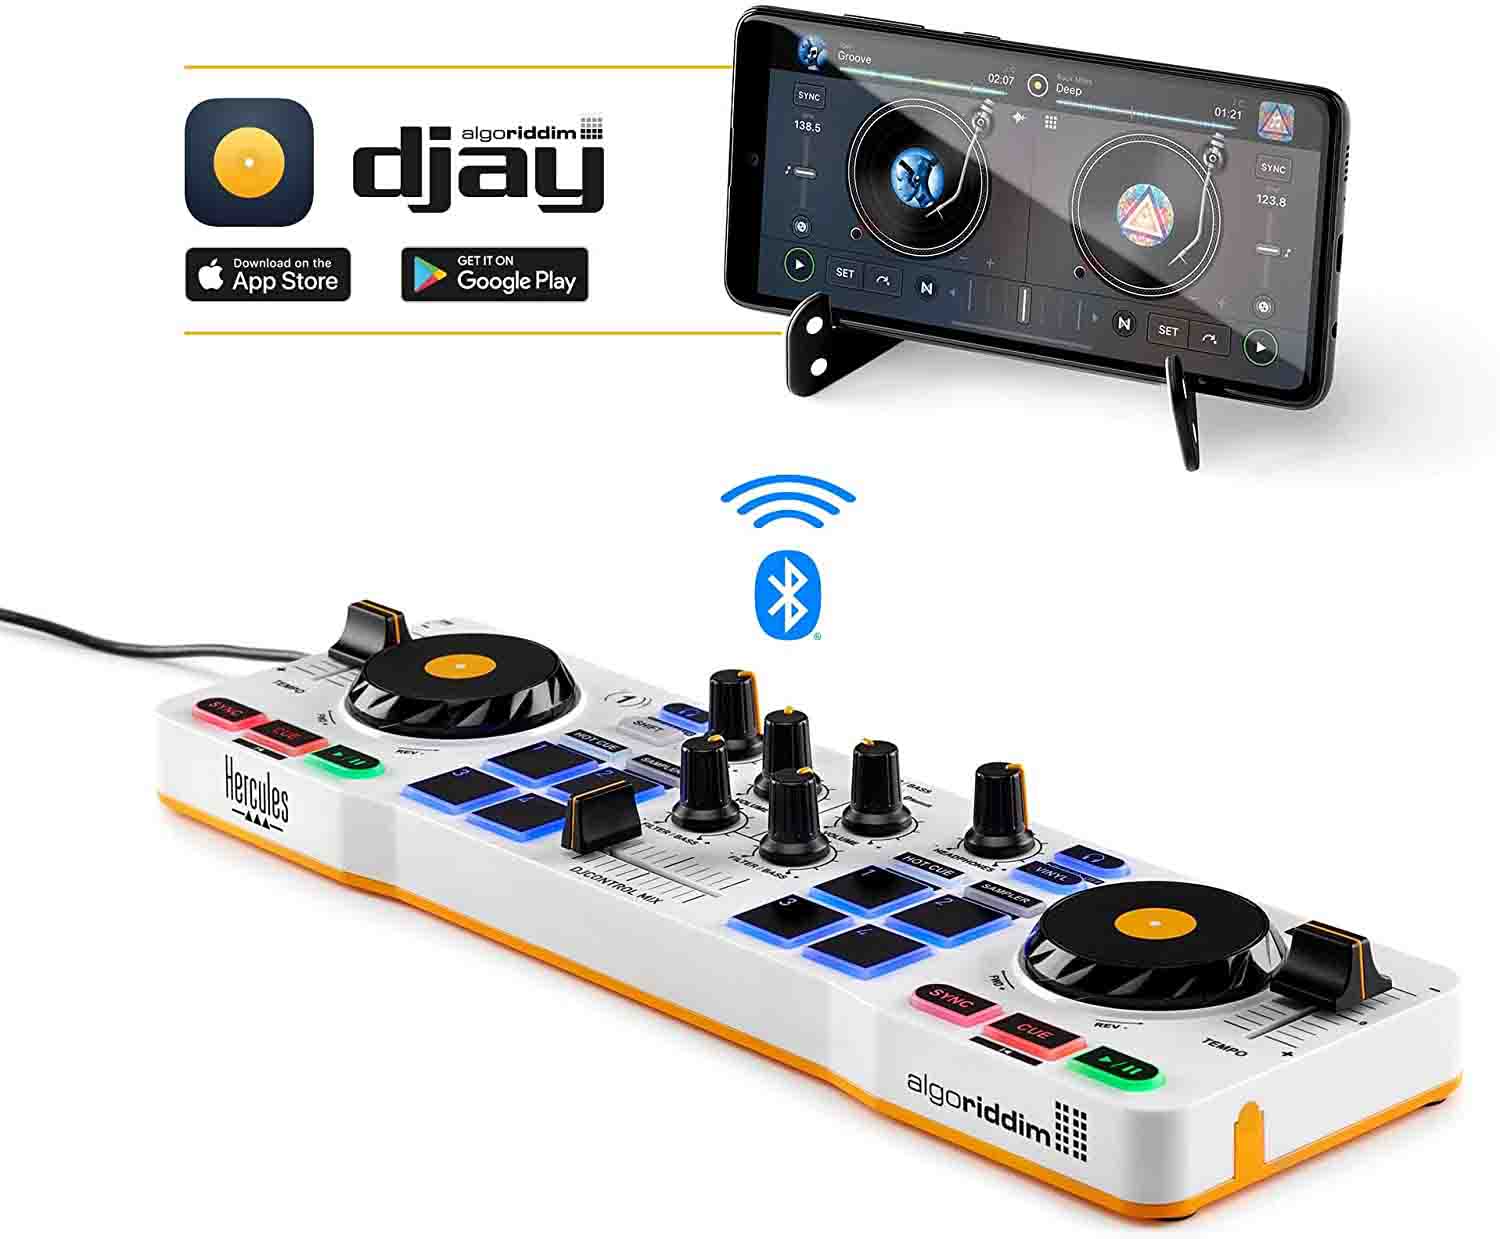 B-Stock: Hercules DJCONTROL MIX for Android and iOS Smartphones with Algoriddim djay App by Hercules